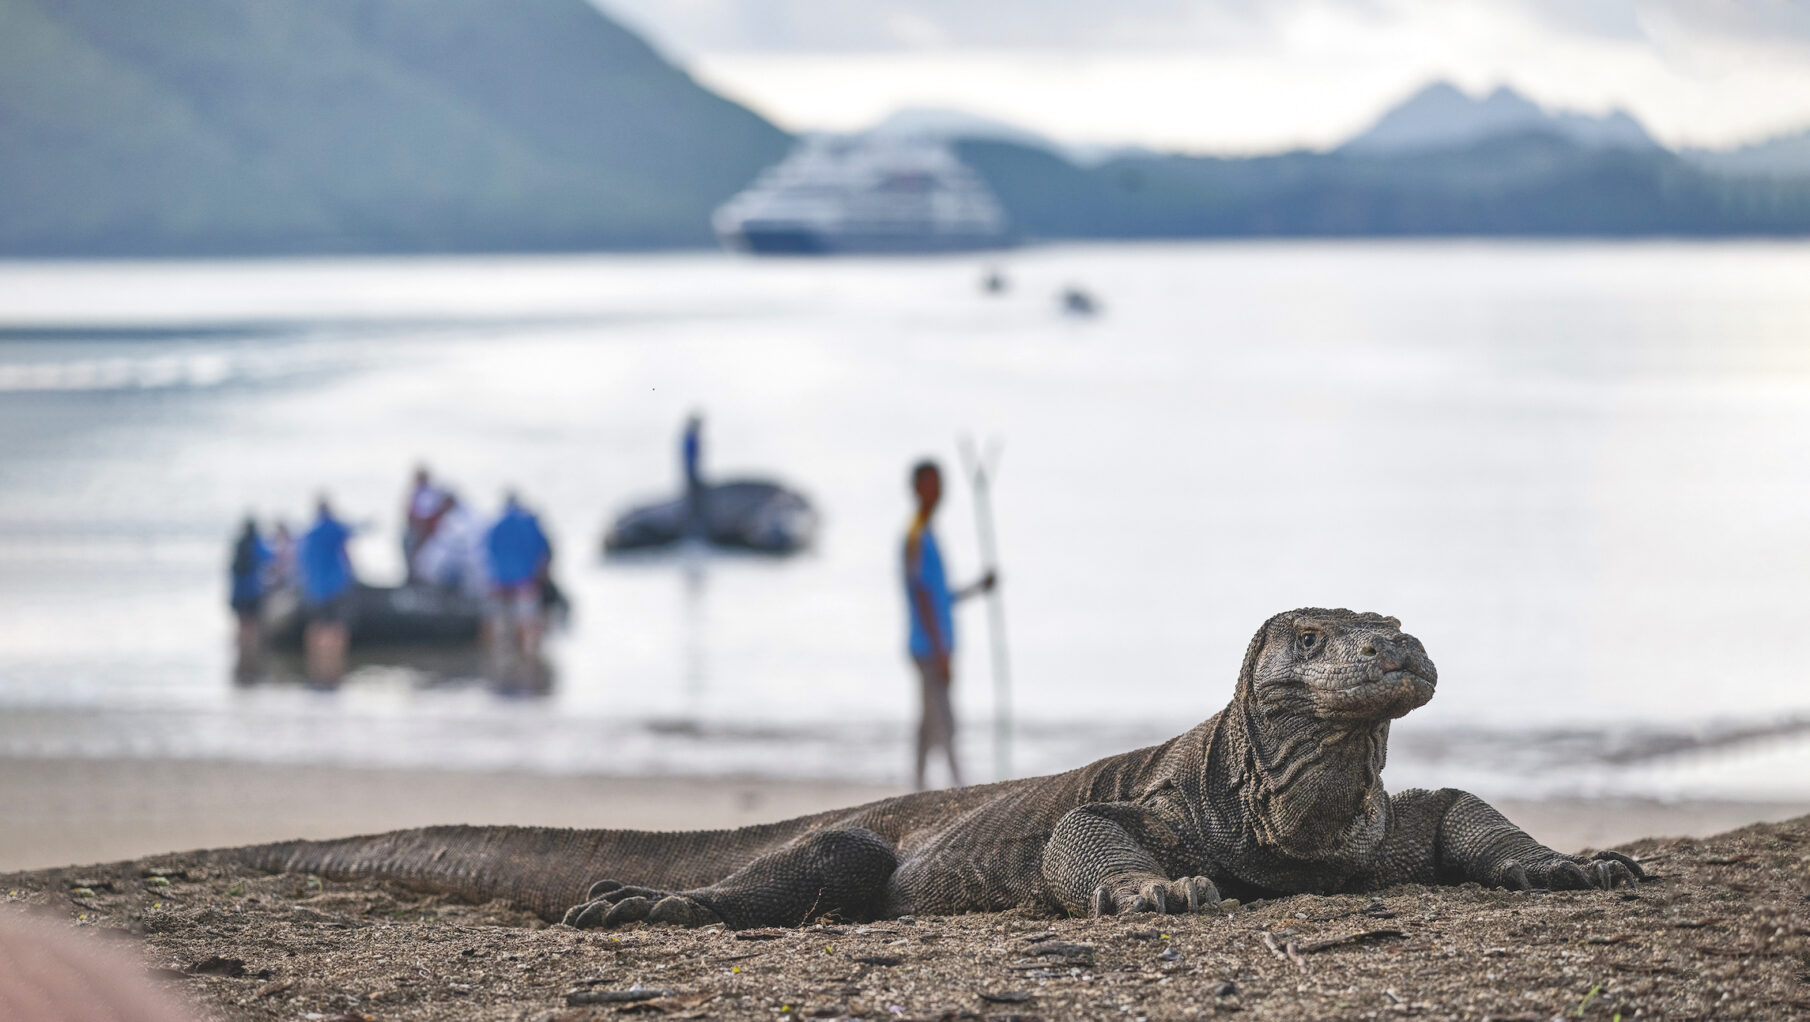 A Komodo Dragon in Komodo National Park, Indonesia with tourists in the background is part of the air cruise trend